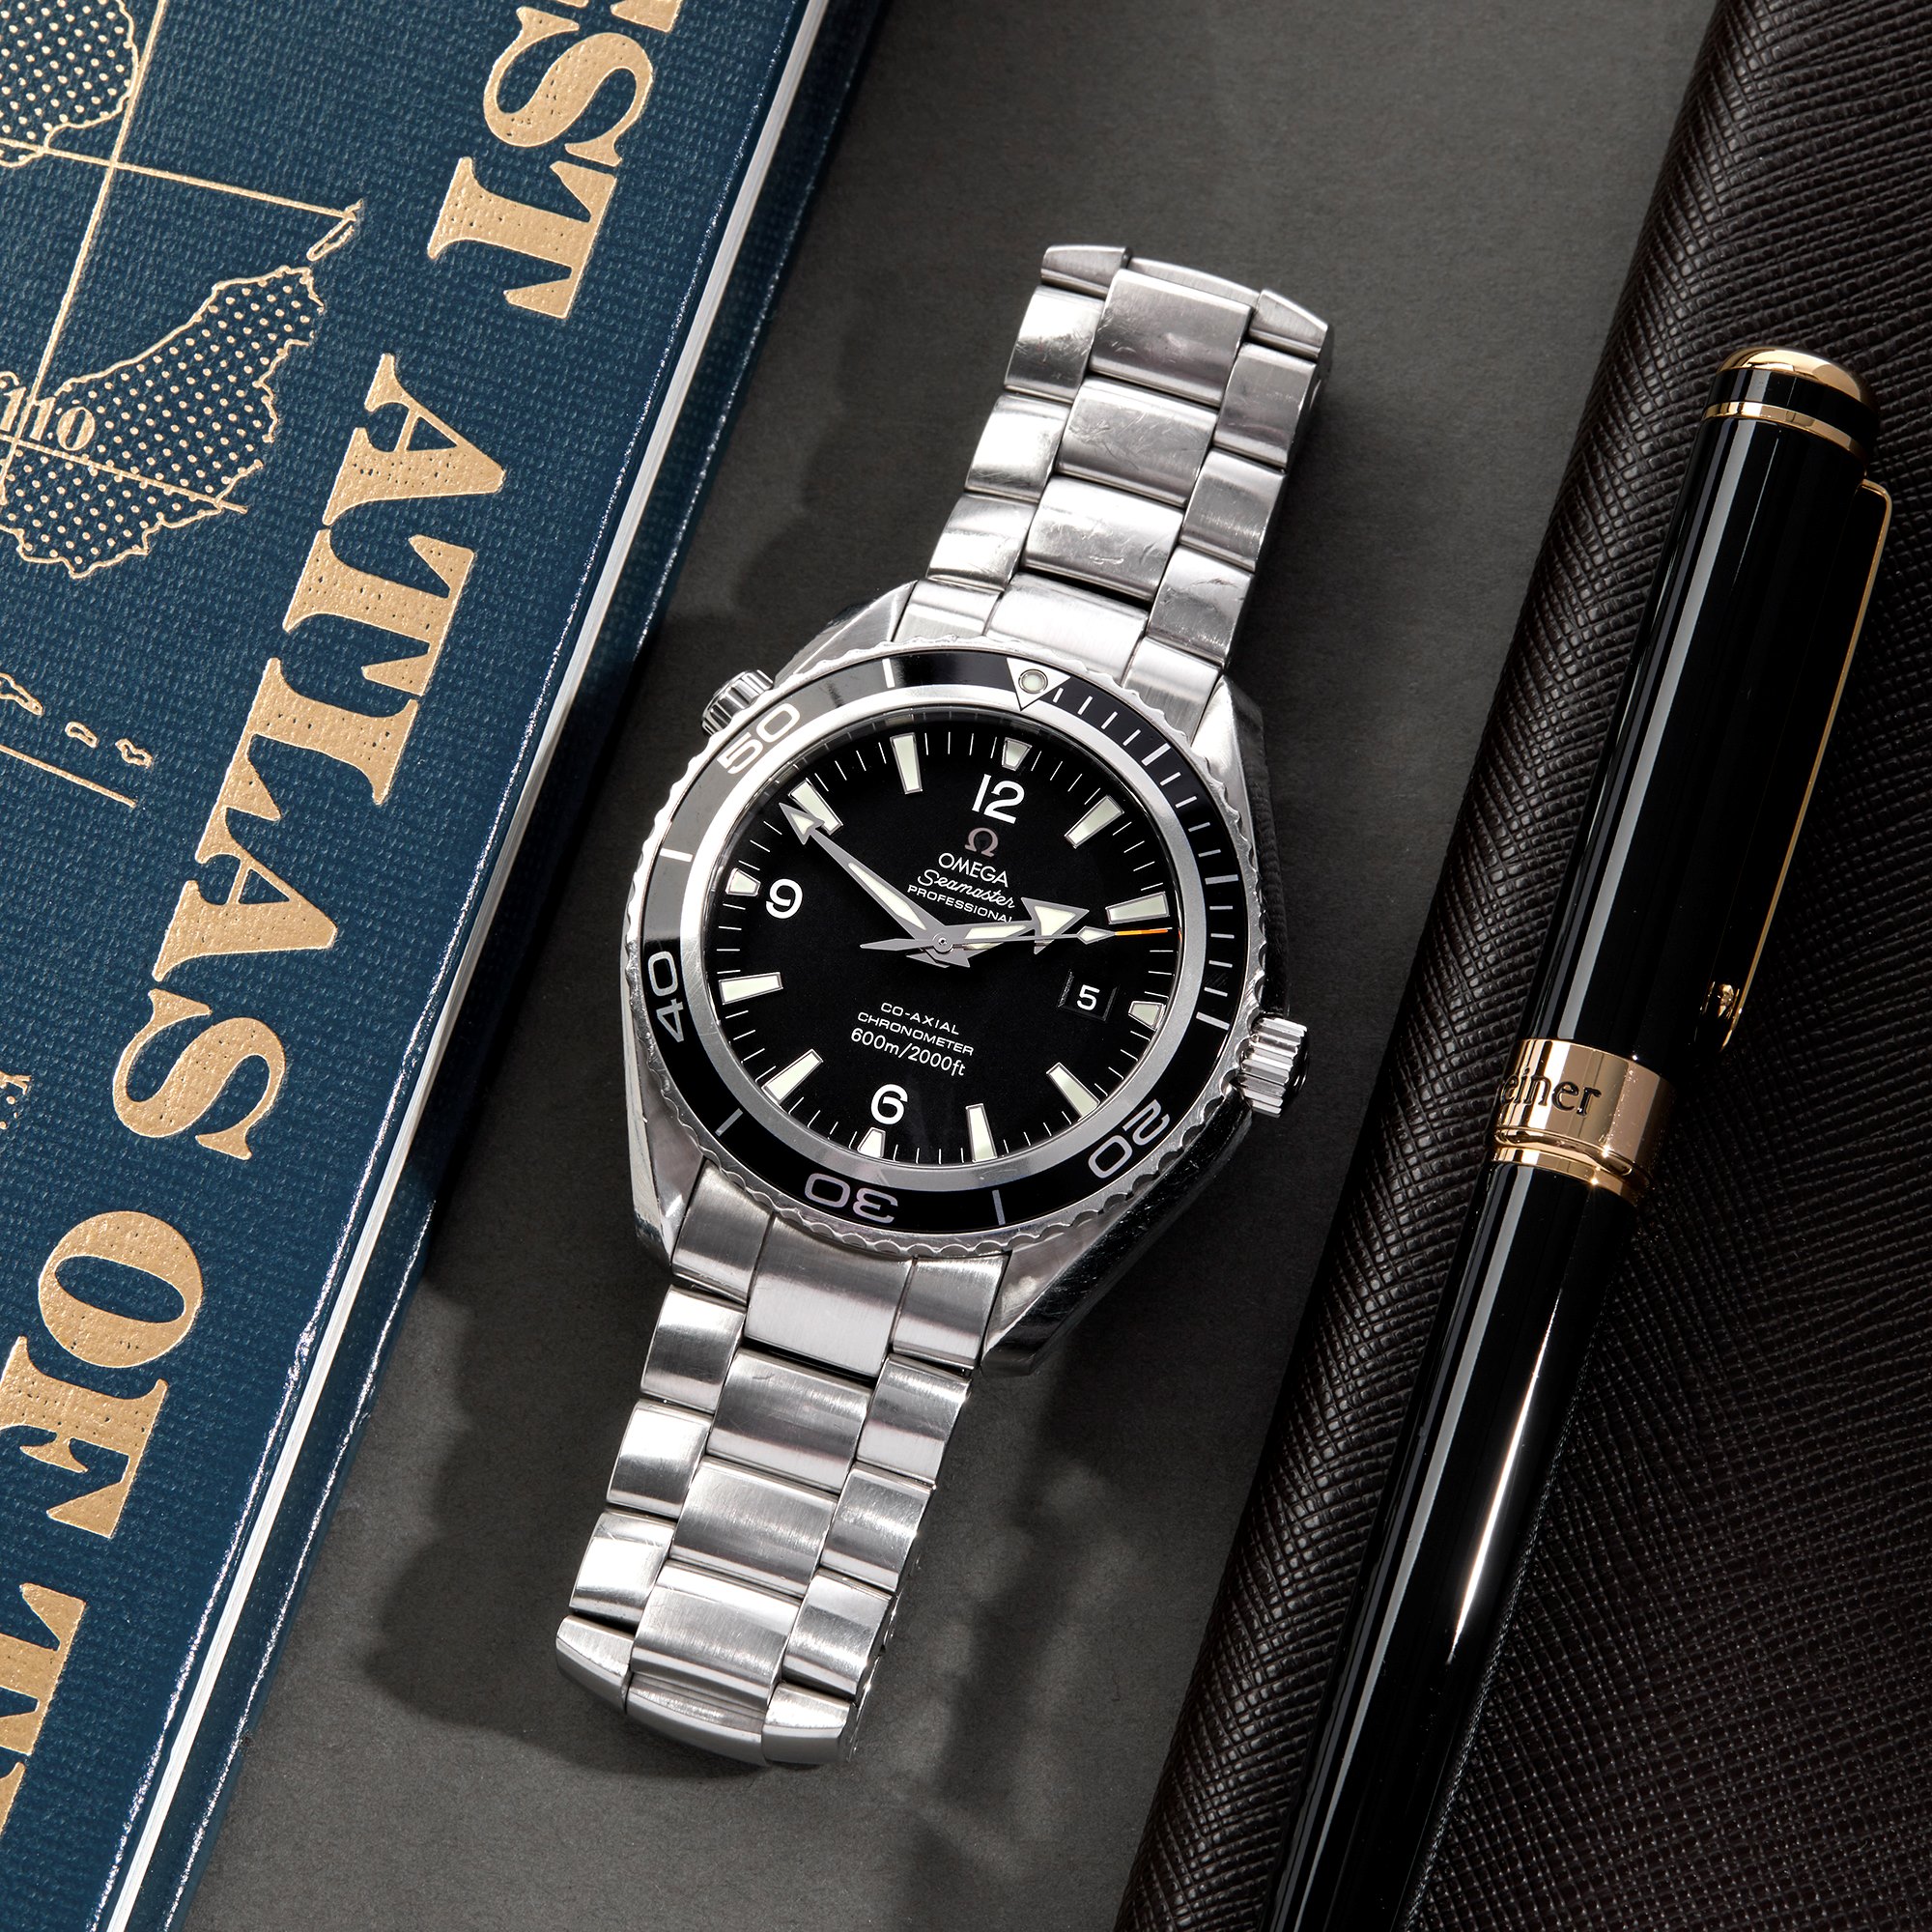 Omega Seamaster Planet Ocean SAS Special Edition Stainless Steel - 22005200 Roestvrij Staal 22005200